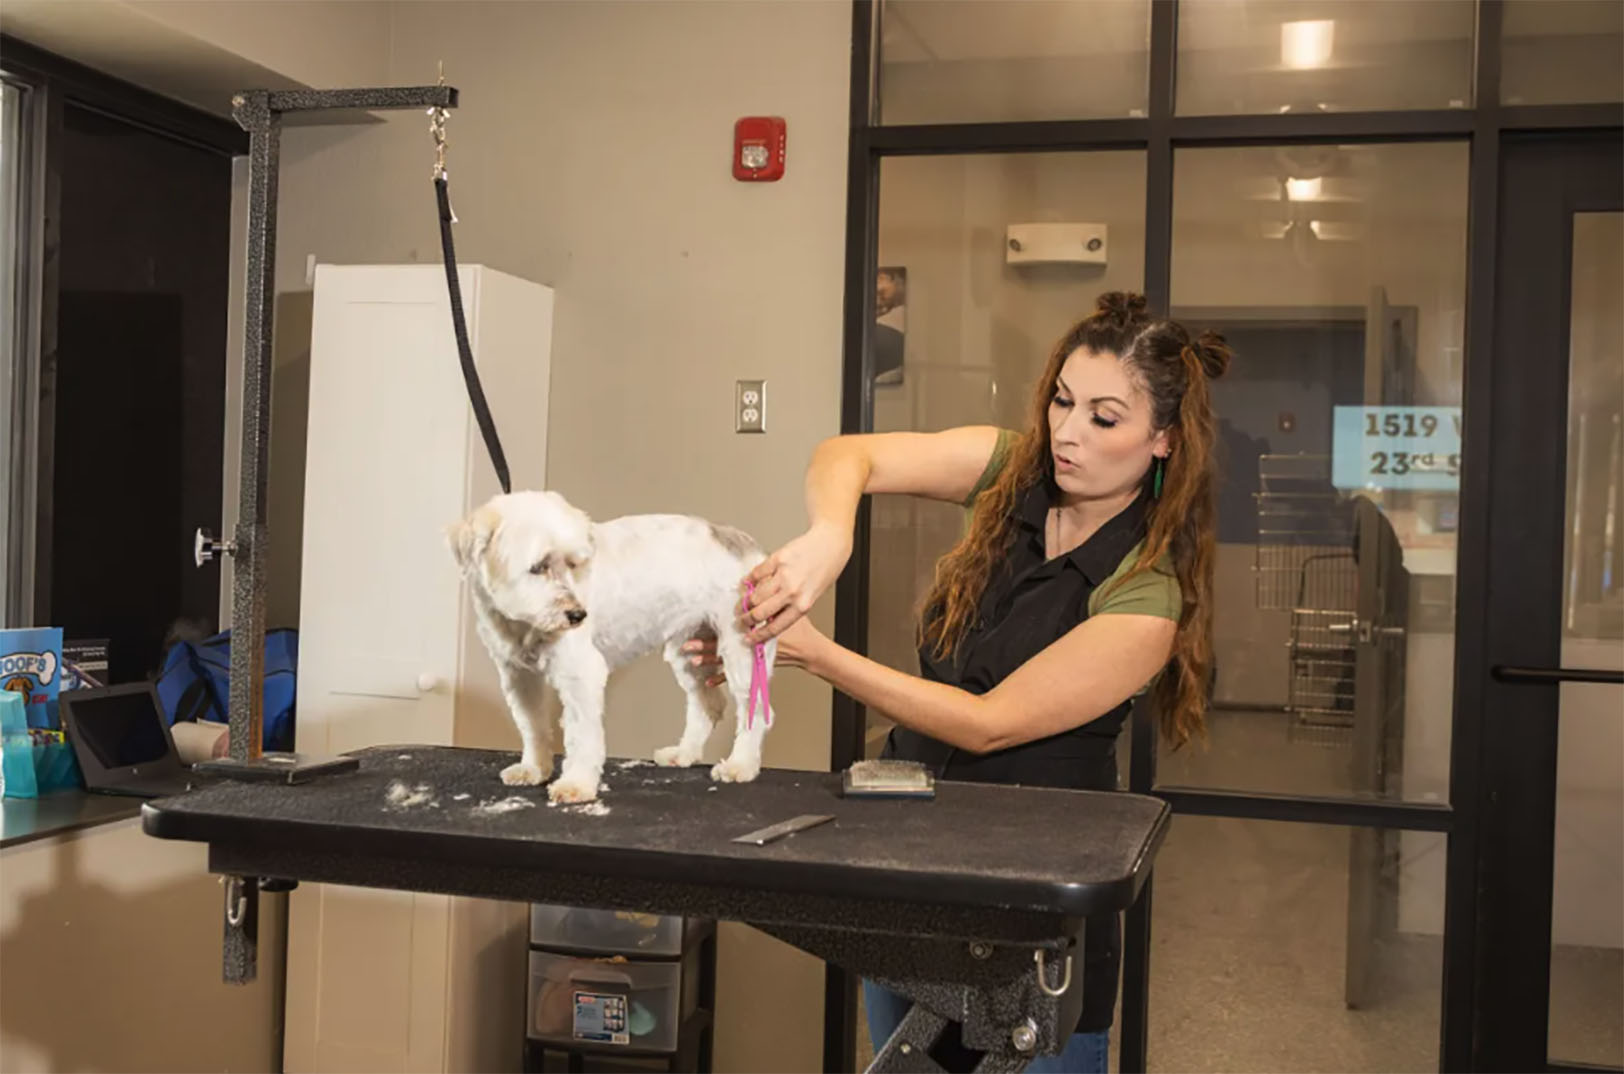 Pawsitive impacts: Social venture aims to break generational poverty through pet grooming